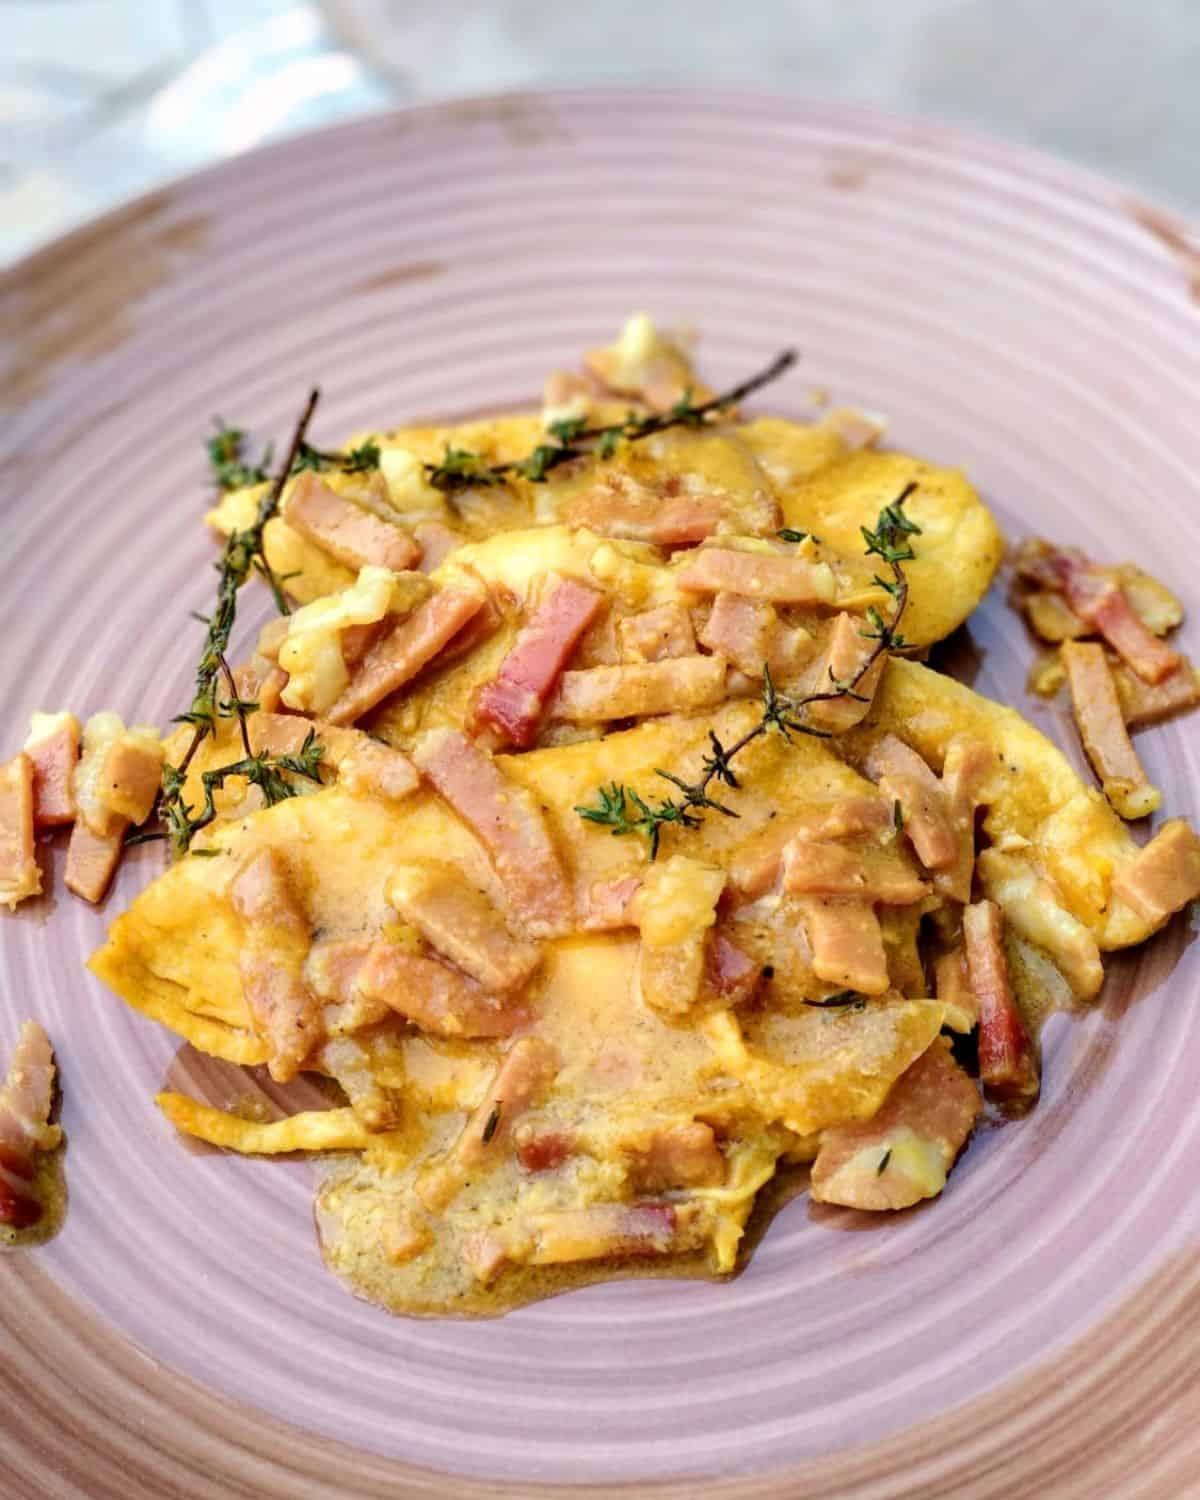 A close up from above of Saffron Chicken Breast with Speck on a light brown plate: The dish shown the saffron cream and some chopped speck on top of the chicken